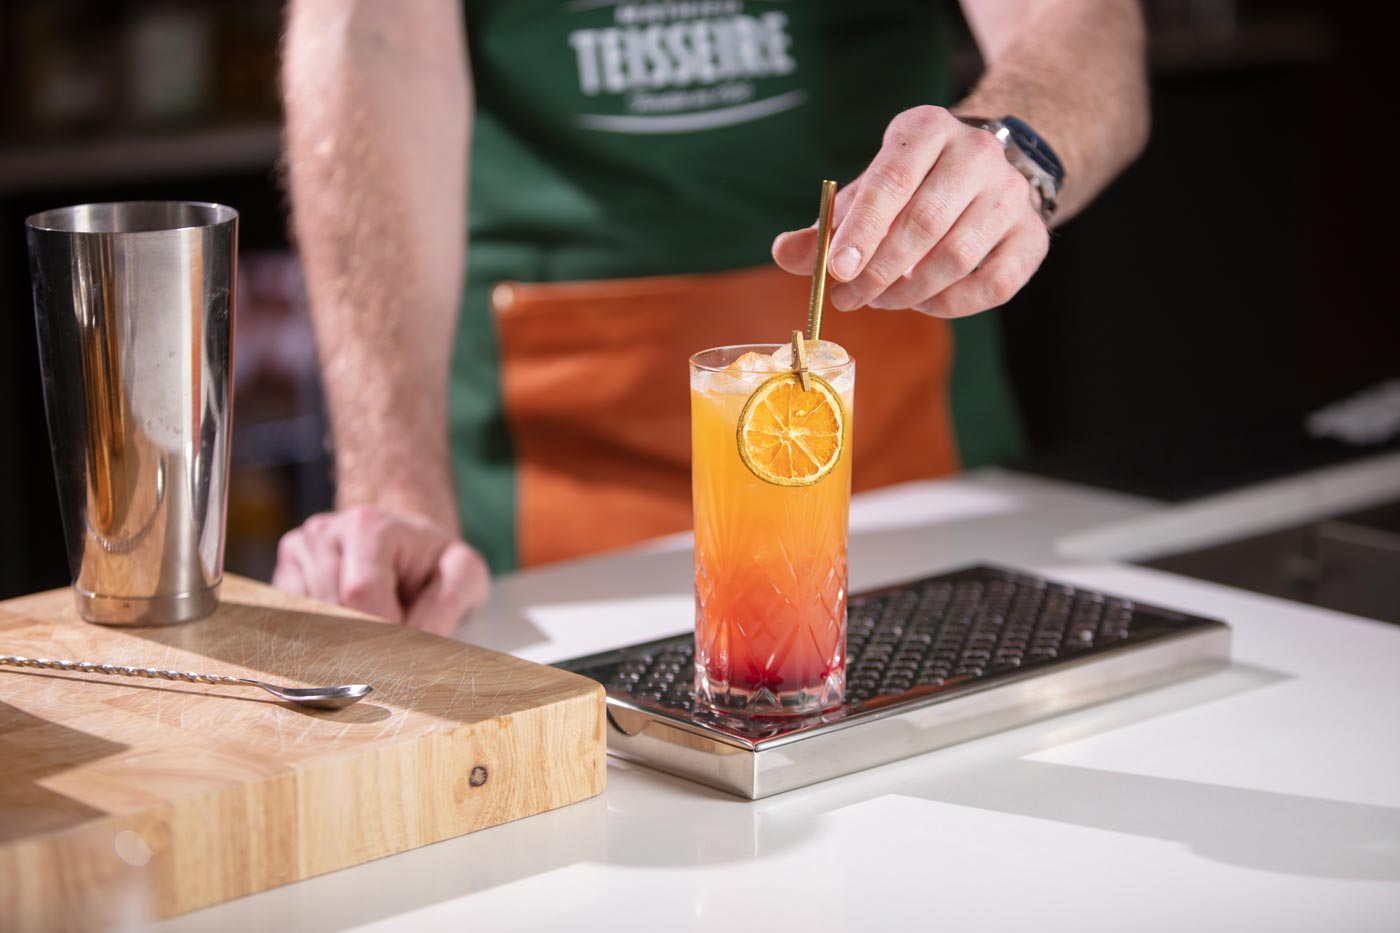 On top of a bar grate is a highball glass. The glass contains an orange drink. On the edge of the glass is an orange slice held in place by a gold peg. A bartender is placing a gold straw into the glass.